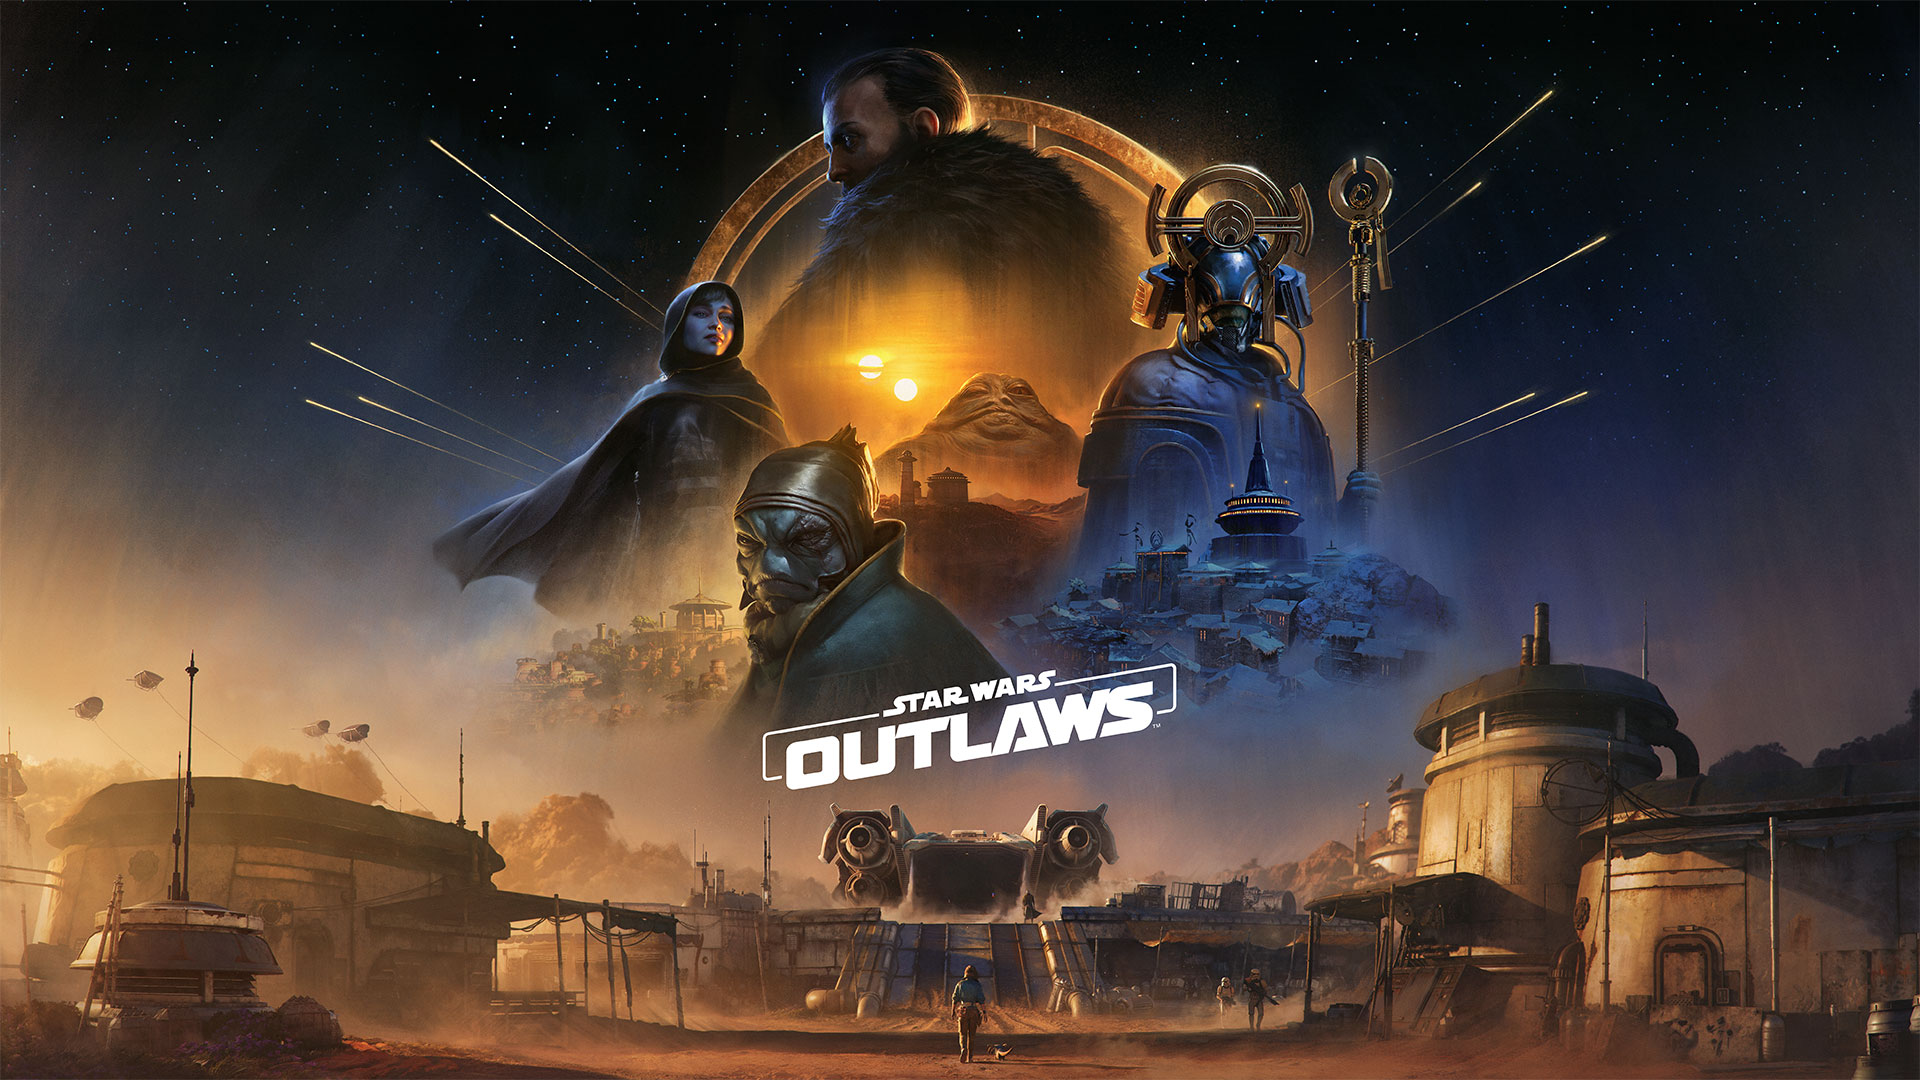 Ubisoft has shared a detailed look at Star Wars Outlaws gameplay